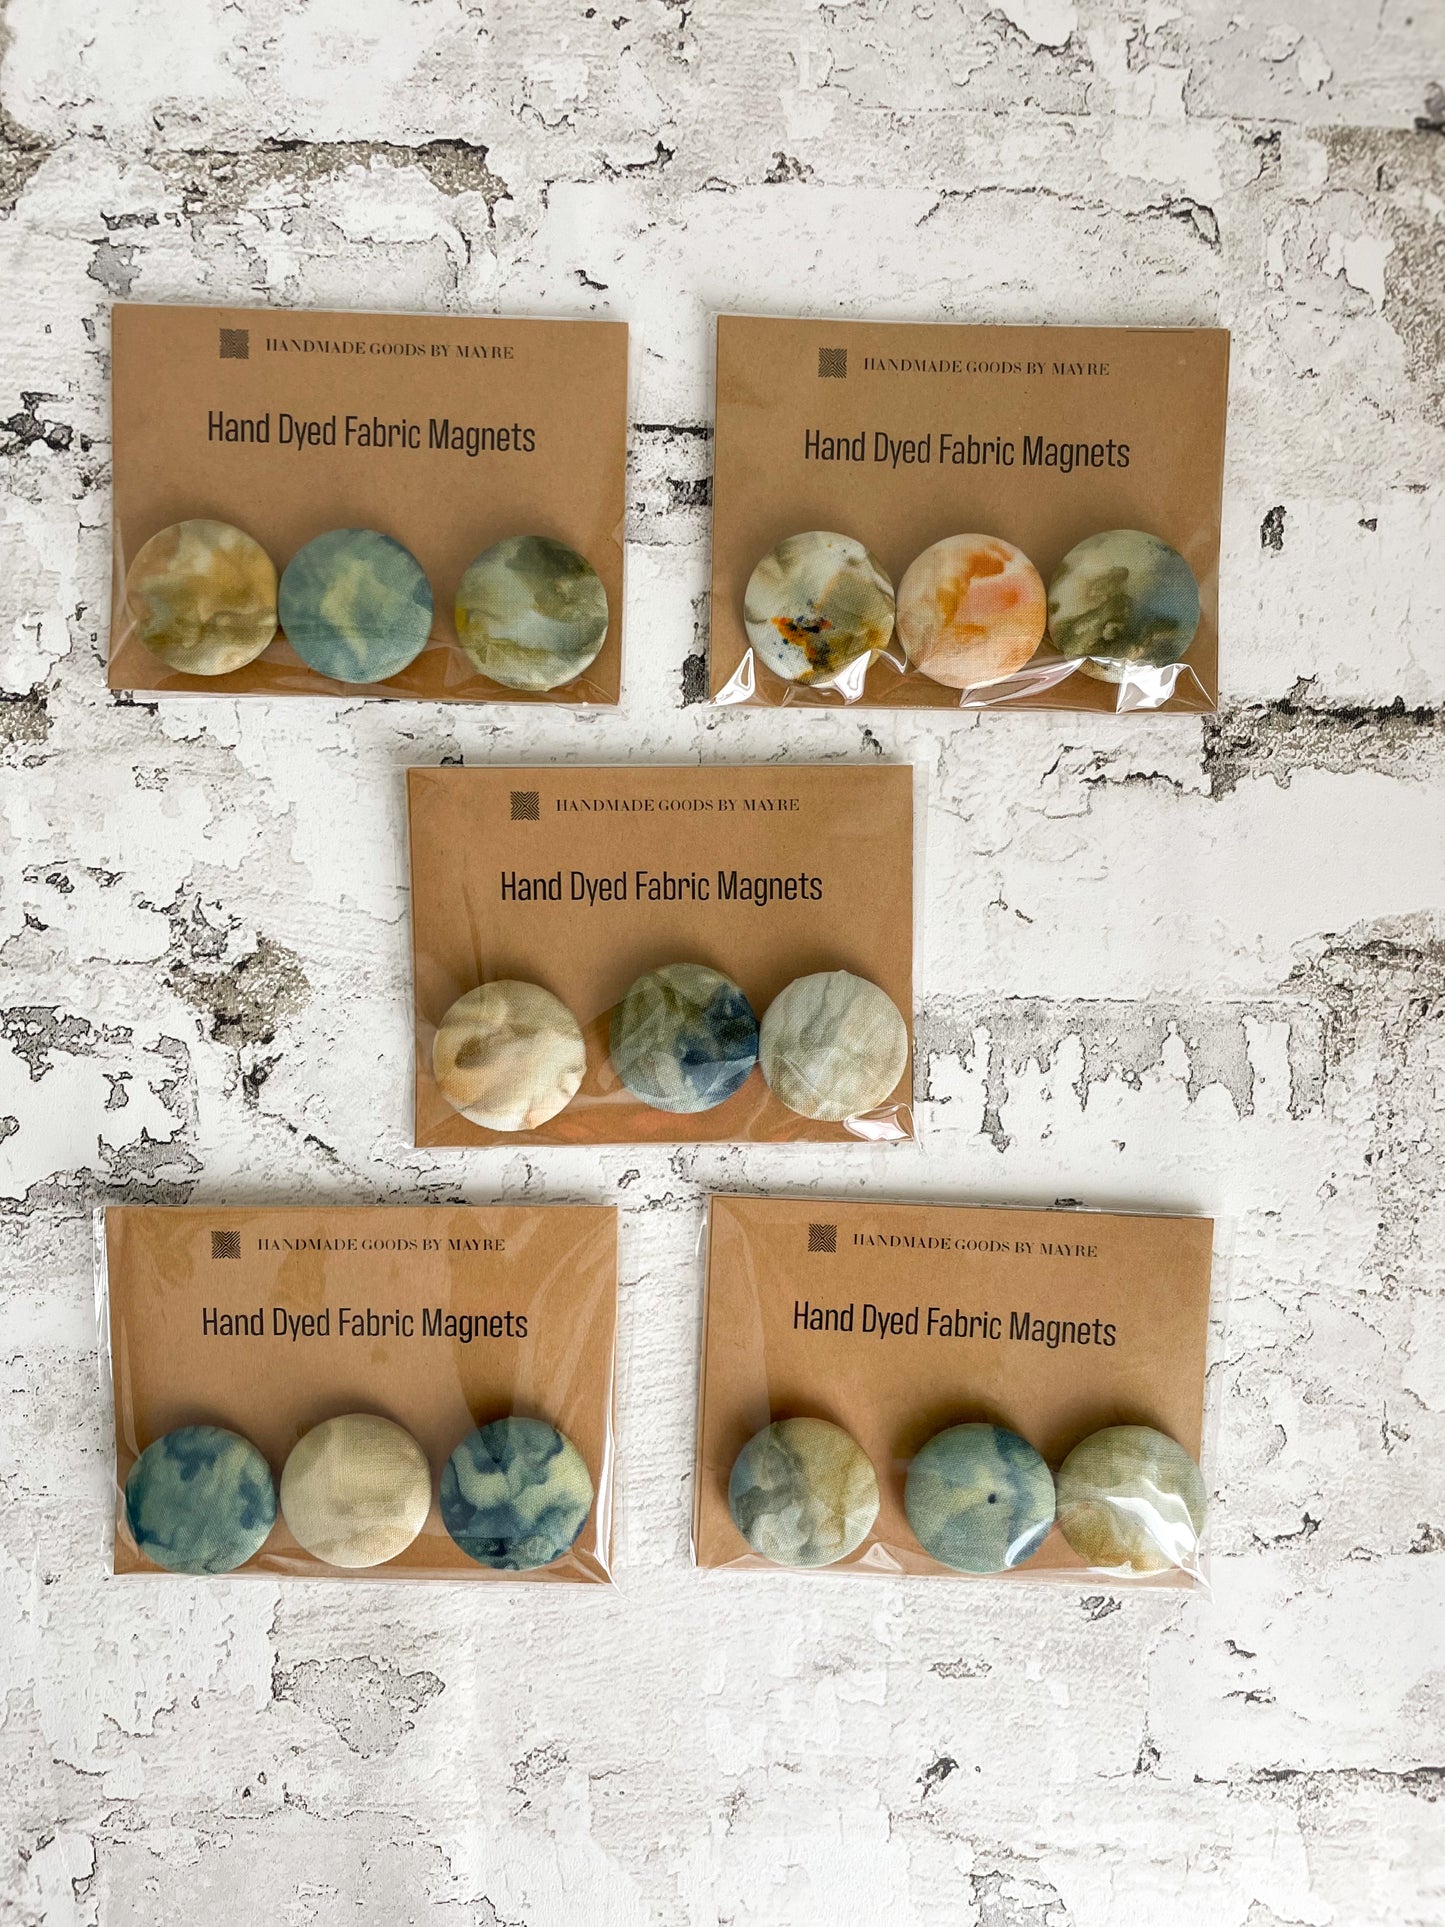 Hand Dyed Fabric Magnets